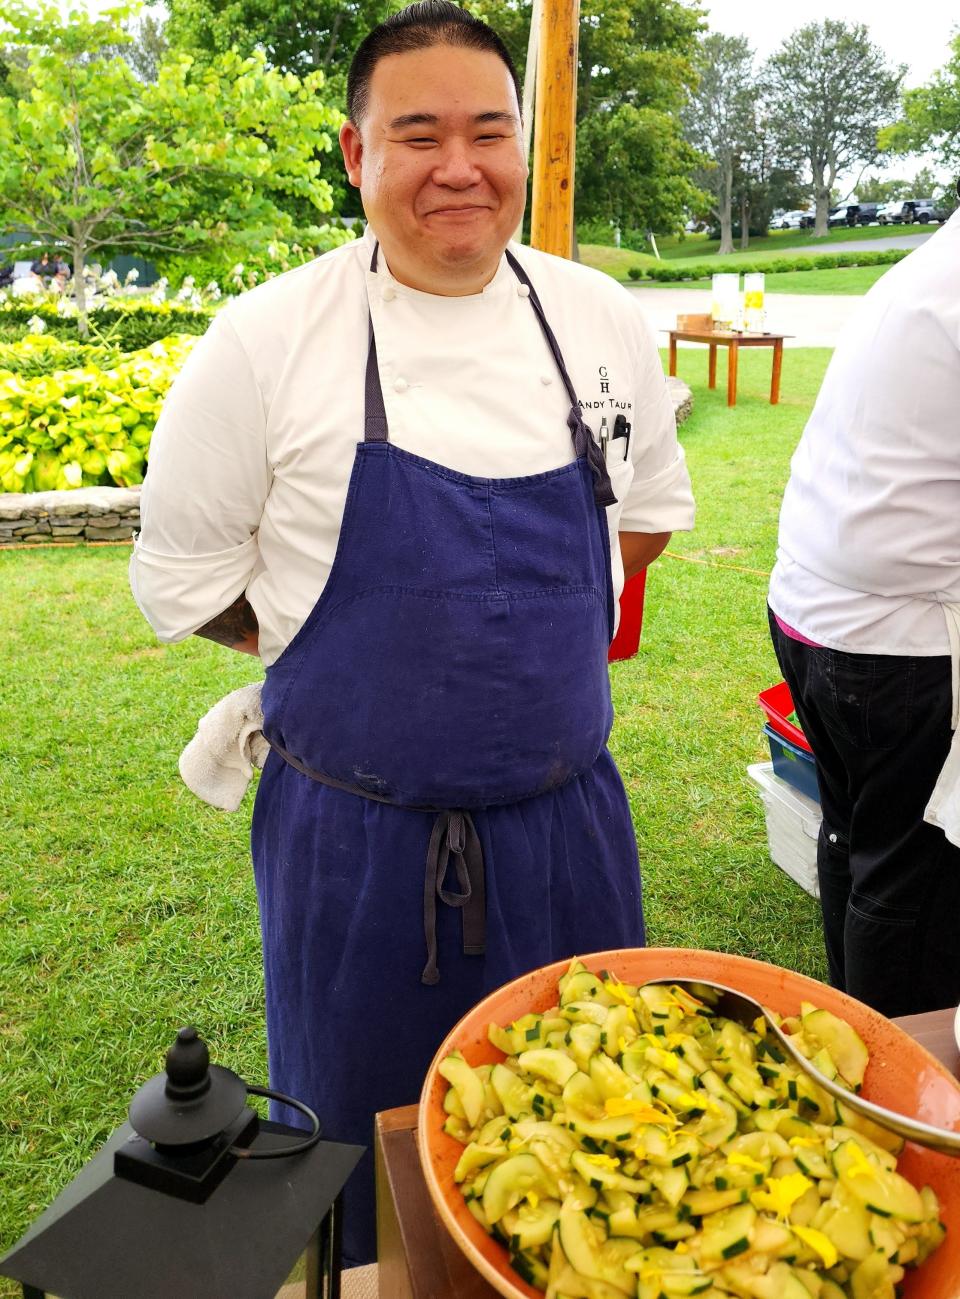 Castle Hill Inn chef Andy Taur served Blackbird Farm beef for his Kalbi-Style Marinated & Grilled Brisket.